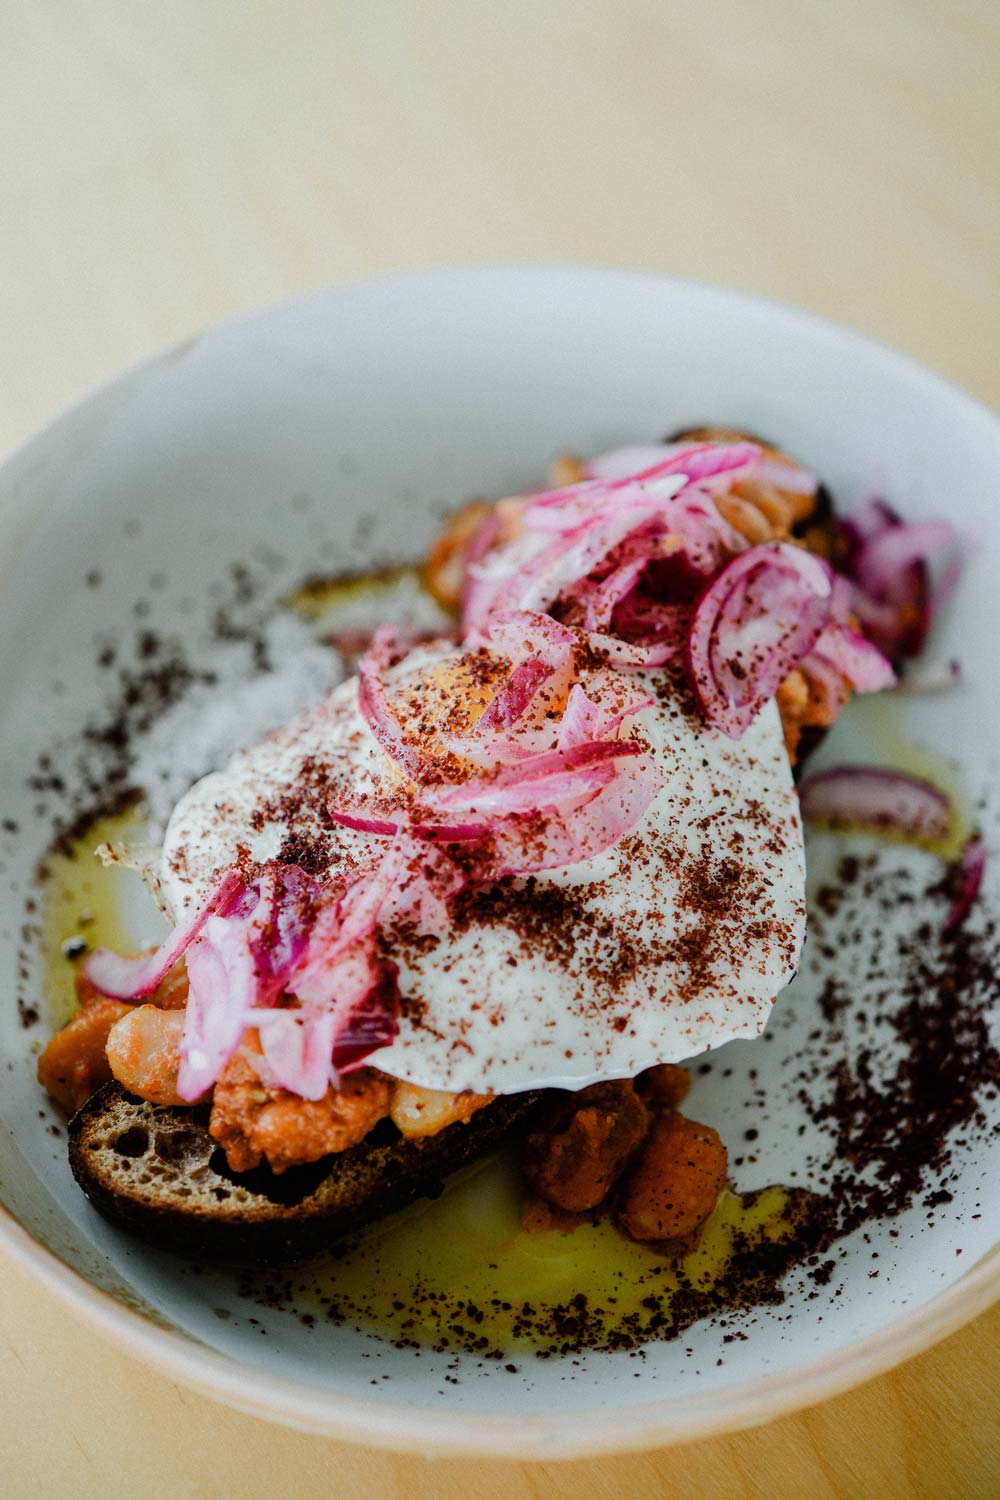 Fried egg, beans and pickled red onion on sourdough toast at Temple cafe